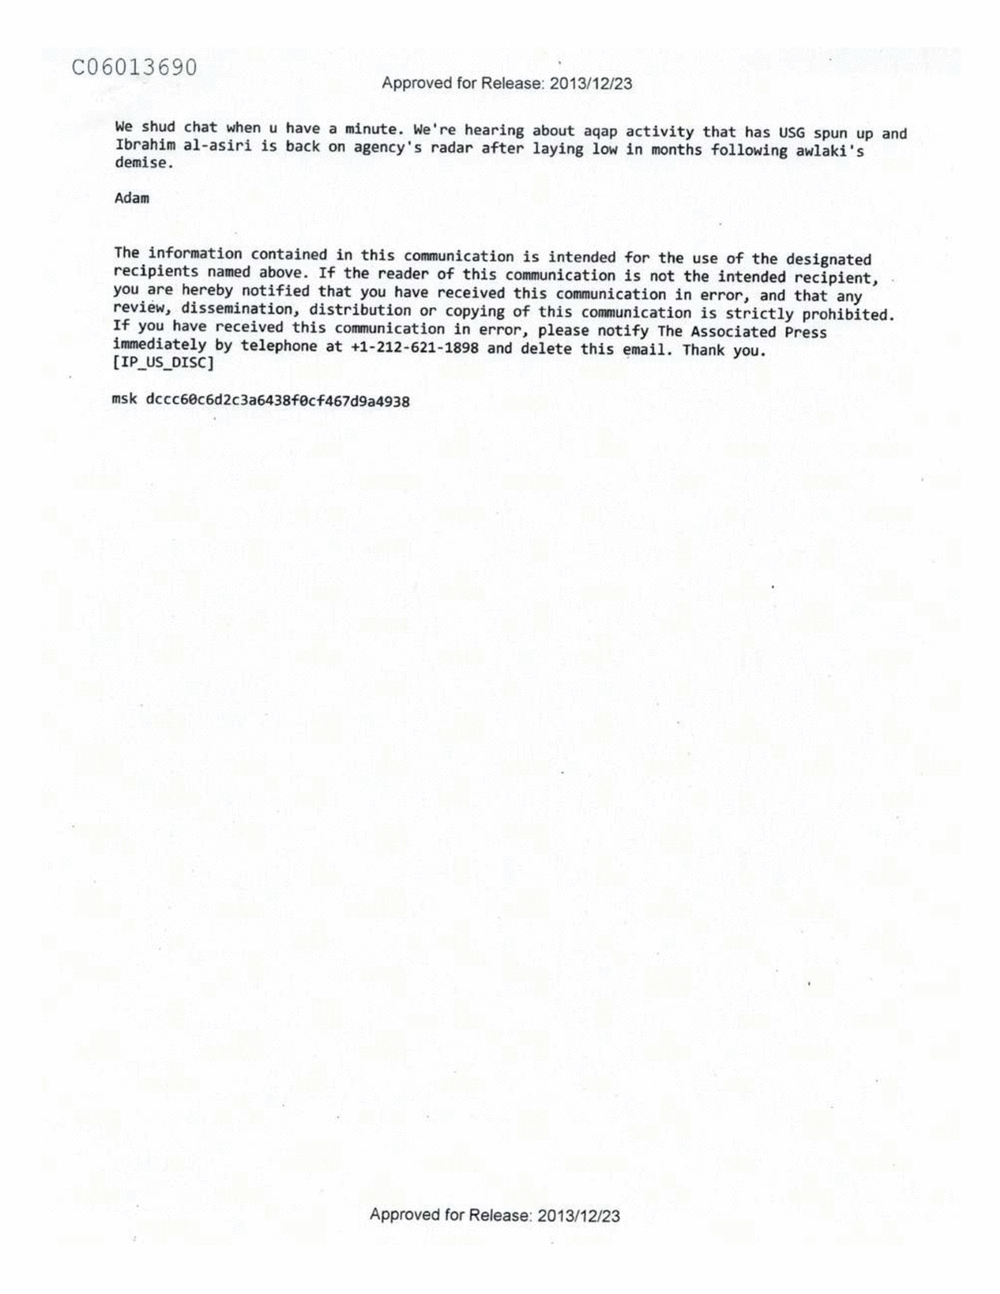 Page 549 from Email Correspondence Between Reporters and CIA Flacks